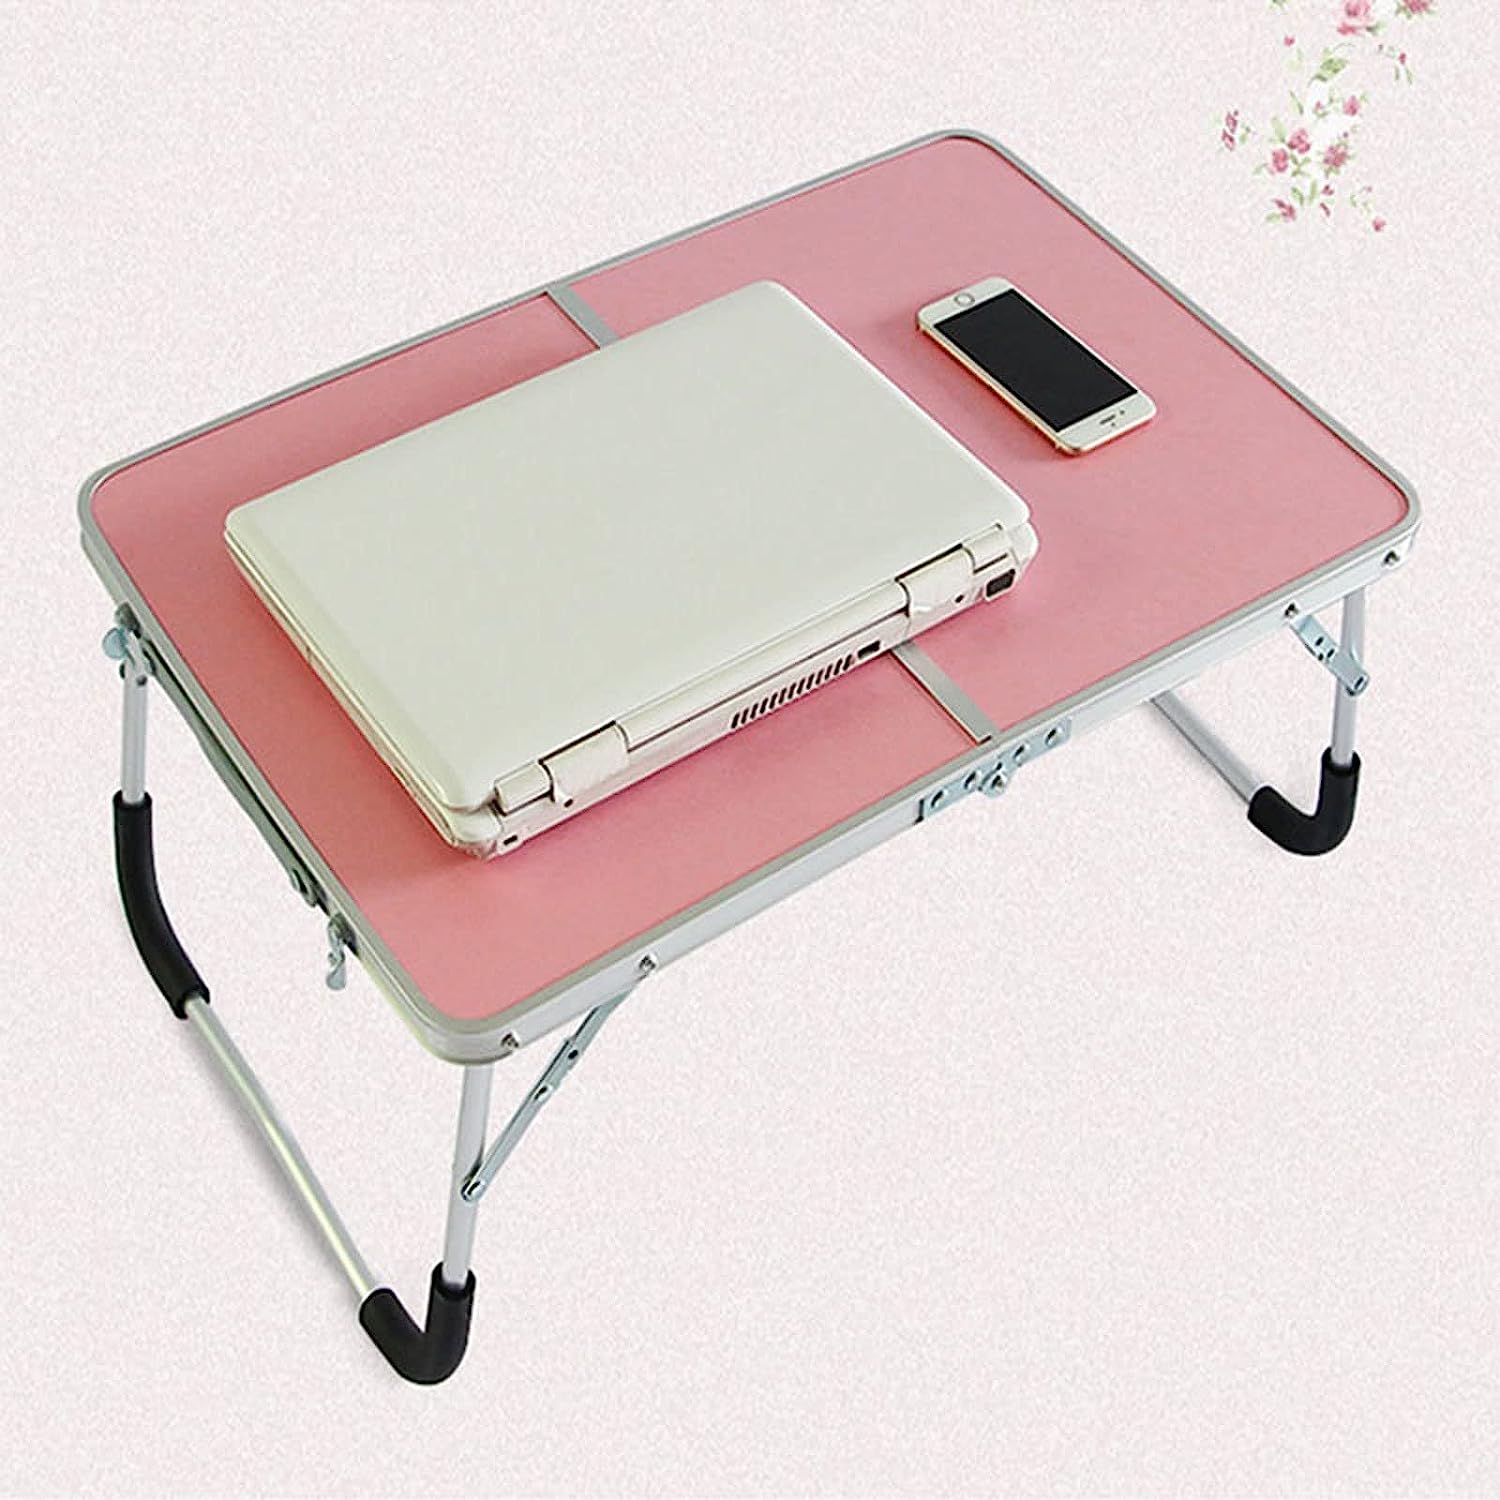 The laptop and phone are placed on the portable folding mini table